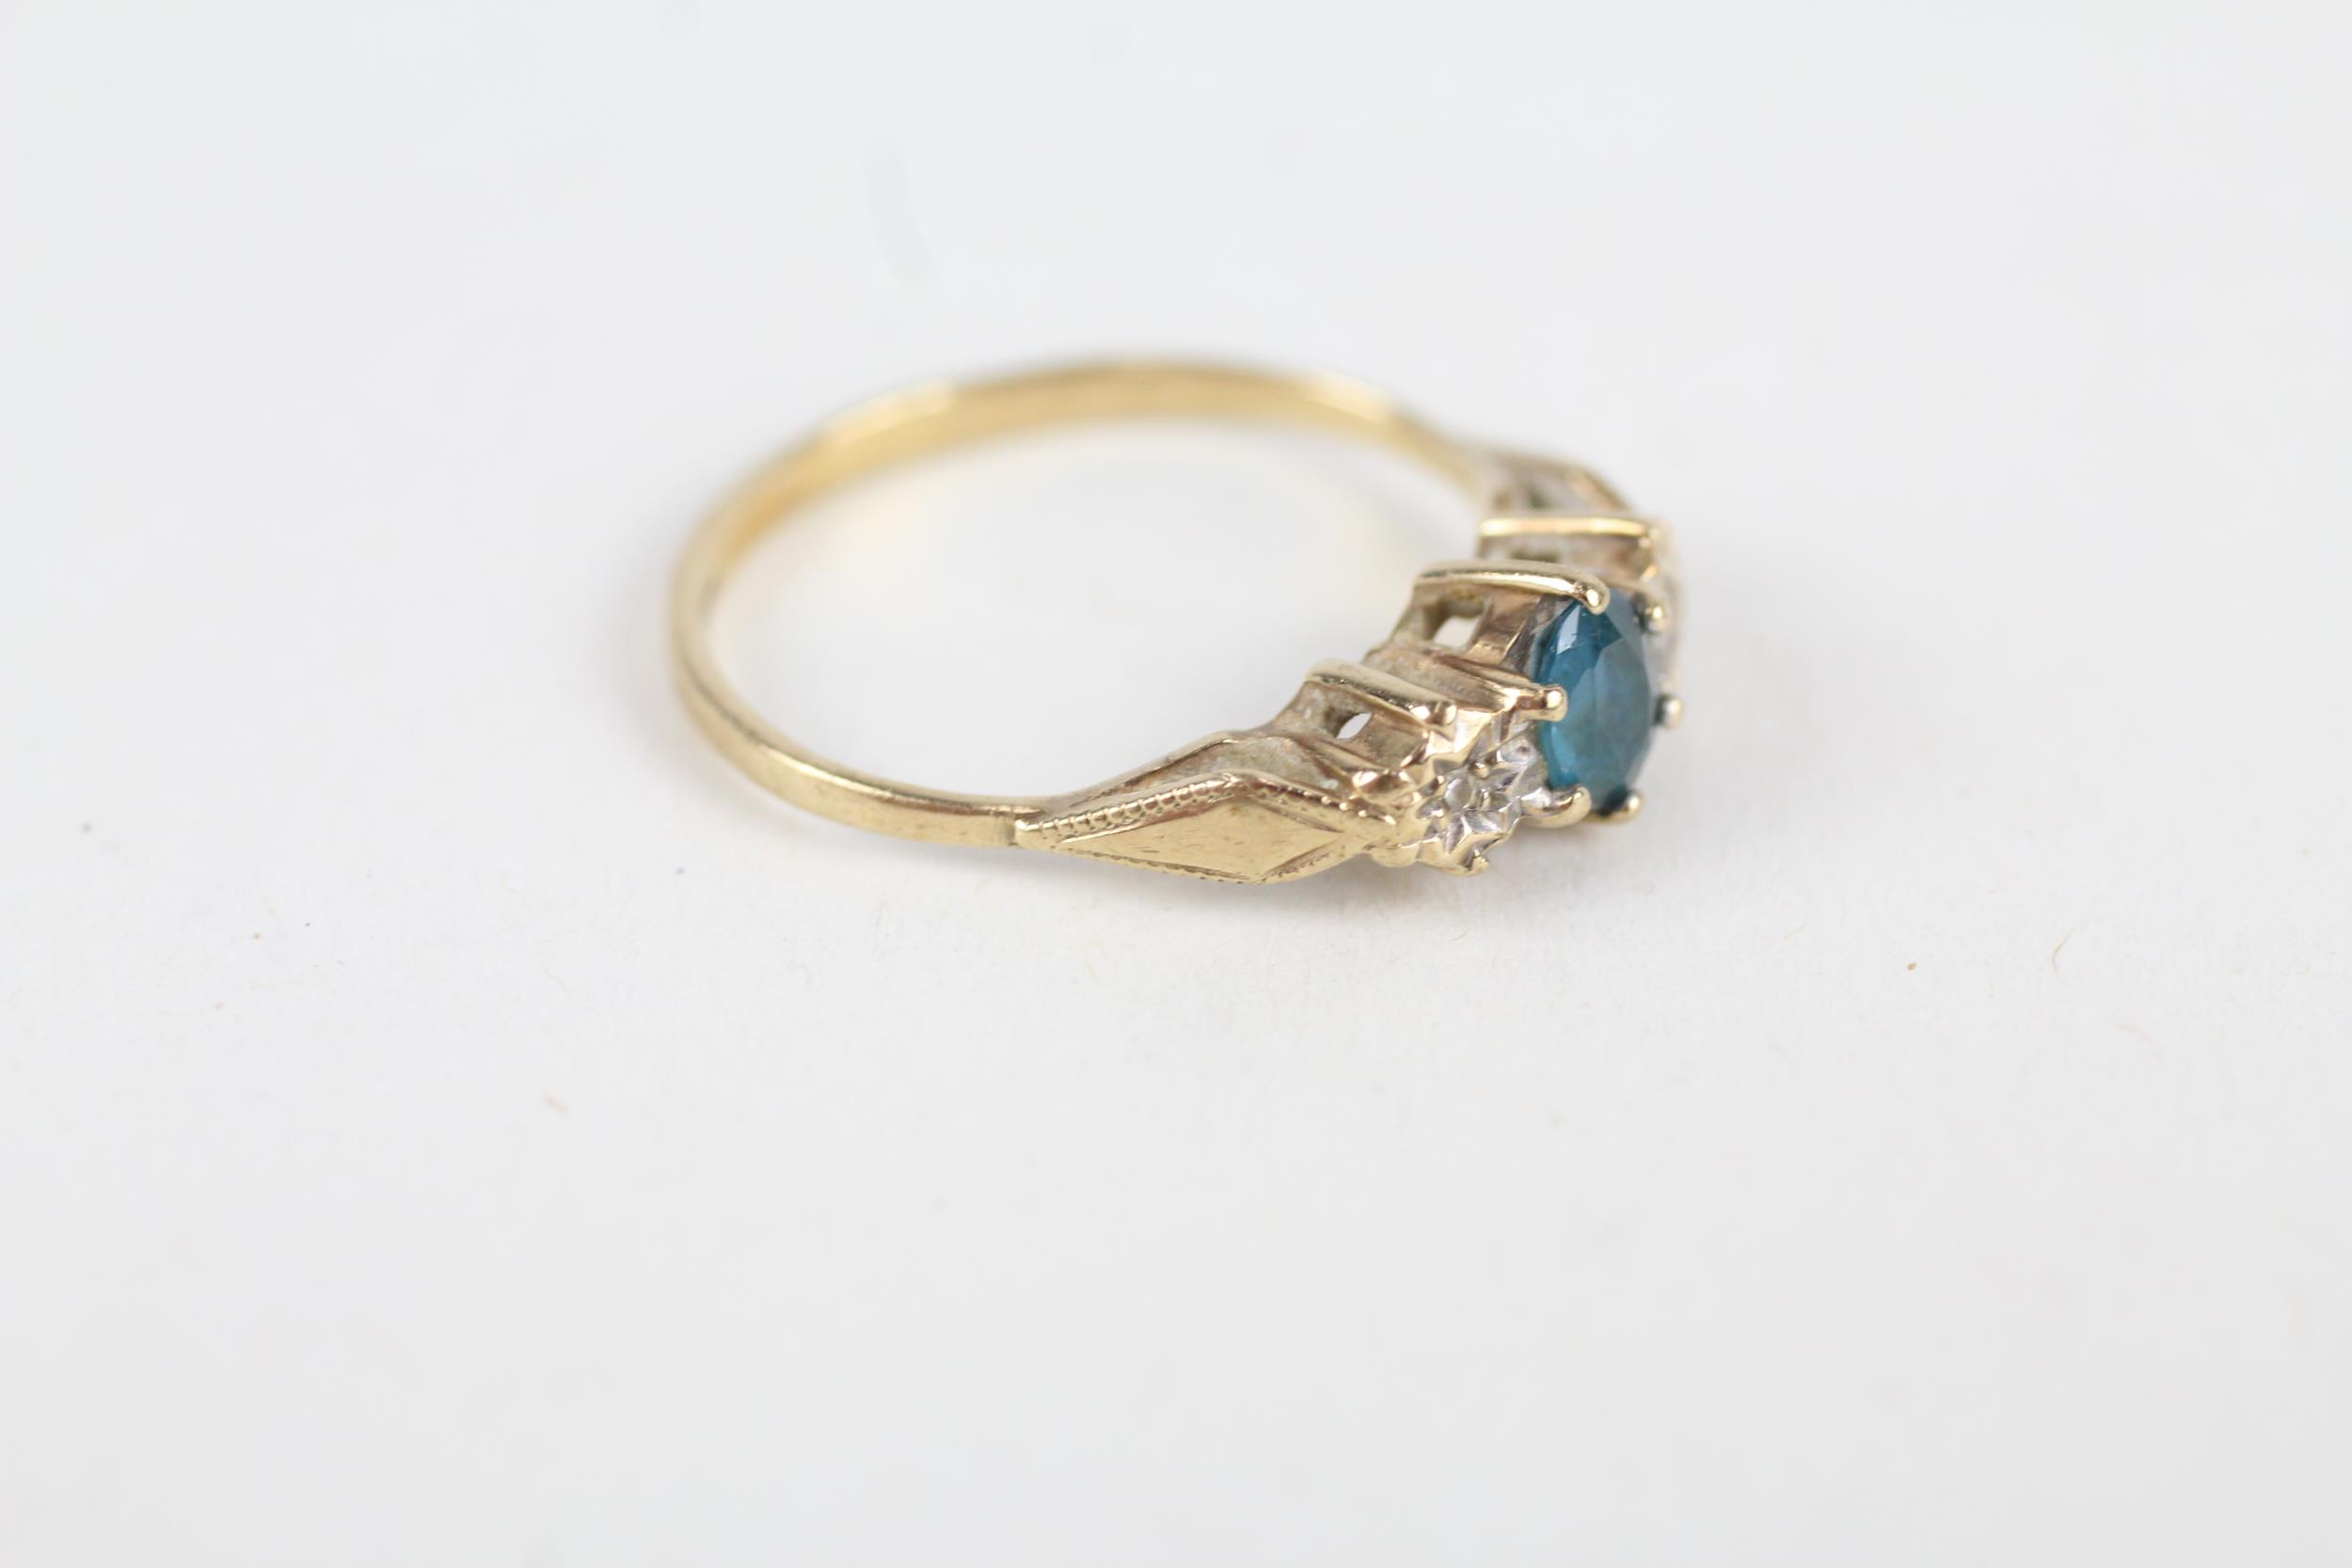 9ct gold blue topaz and diamond set trilogy ring Size M - 1.7 g - Image 2 of 4